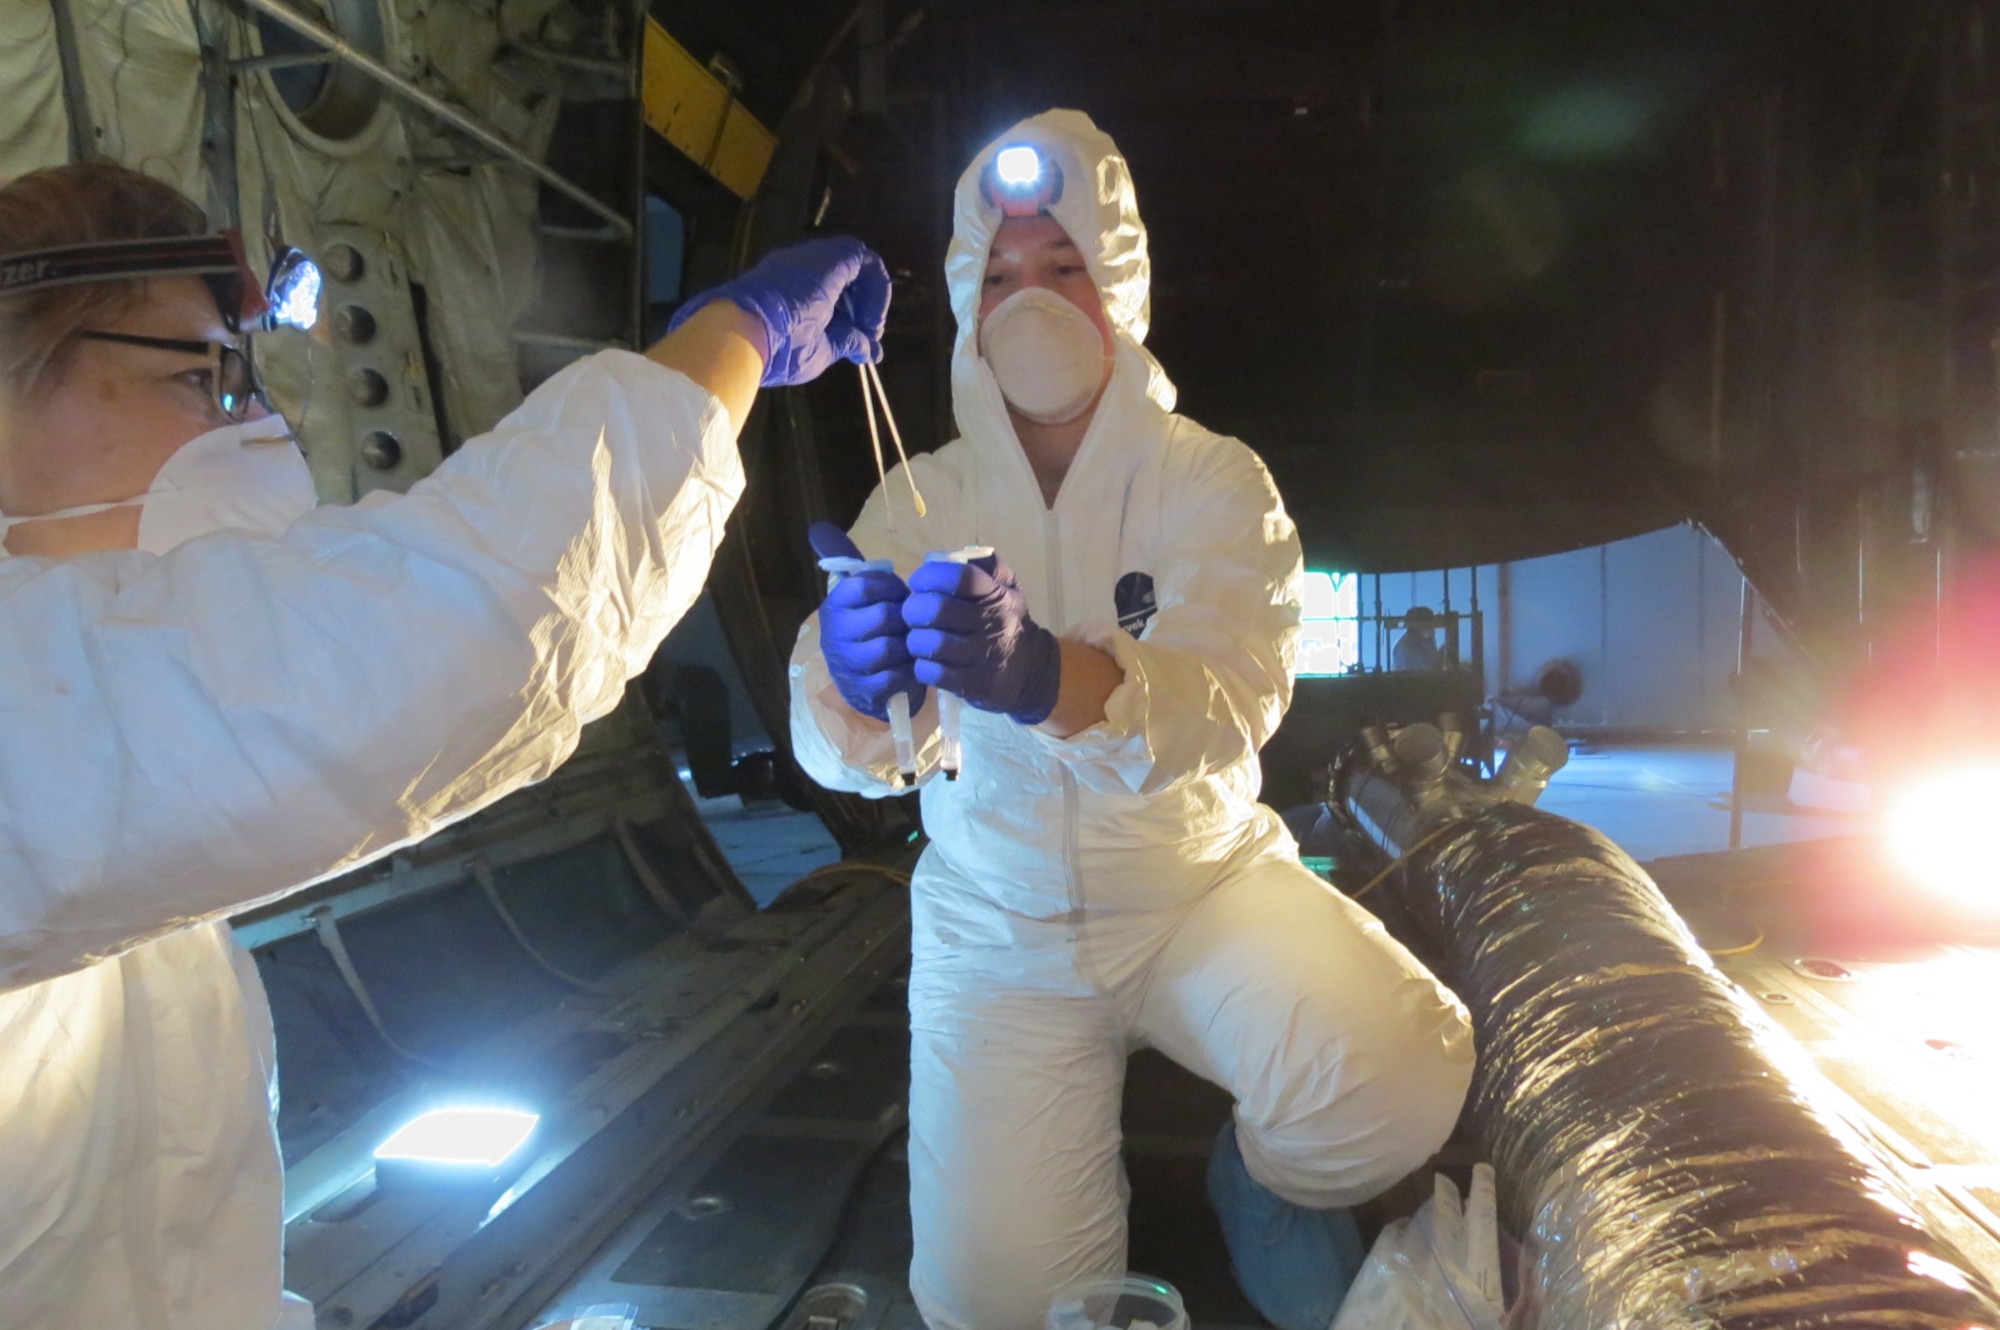 AFRL Biological Materials and Processing Research Team members perform sample tests of various aircraft locations at the conclusion of the Joint Biological Agent Decontamination System process.  (U.S. Air Force photo)